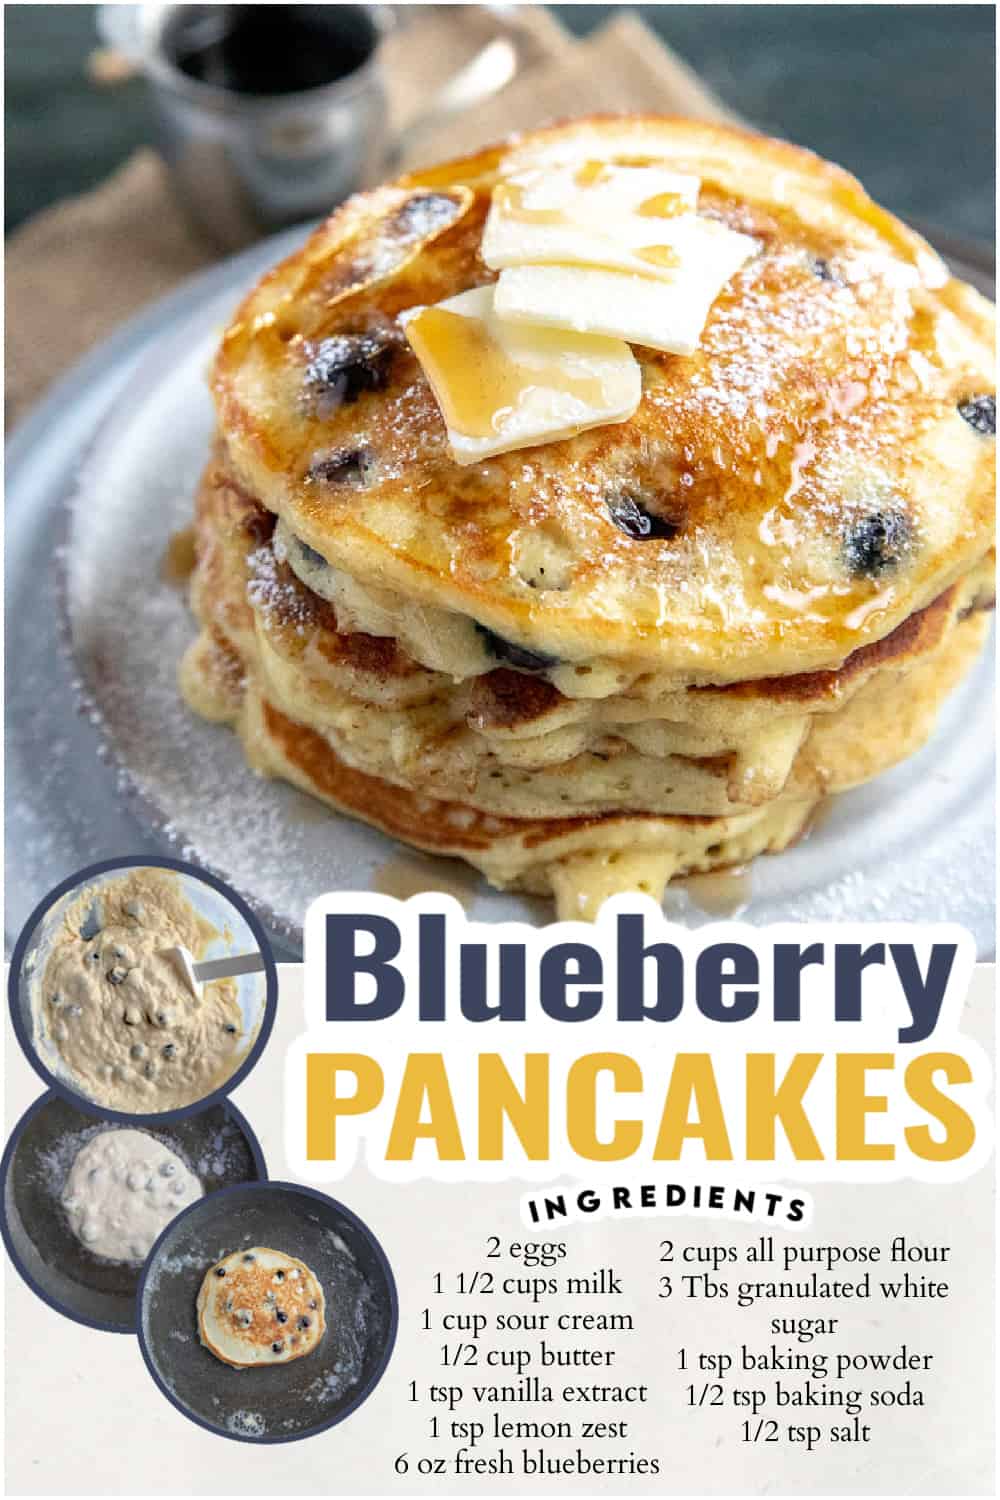 blueberry pancakes stacked on a plate with cut out images of the process to cook them.